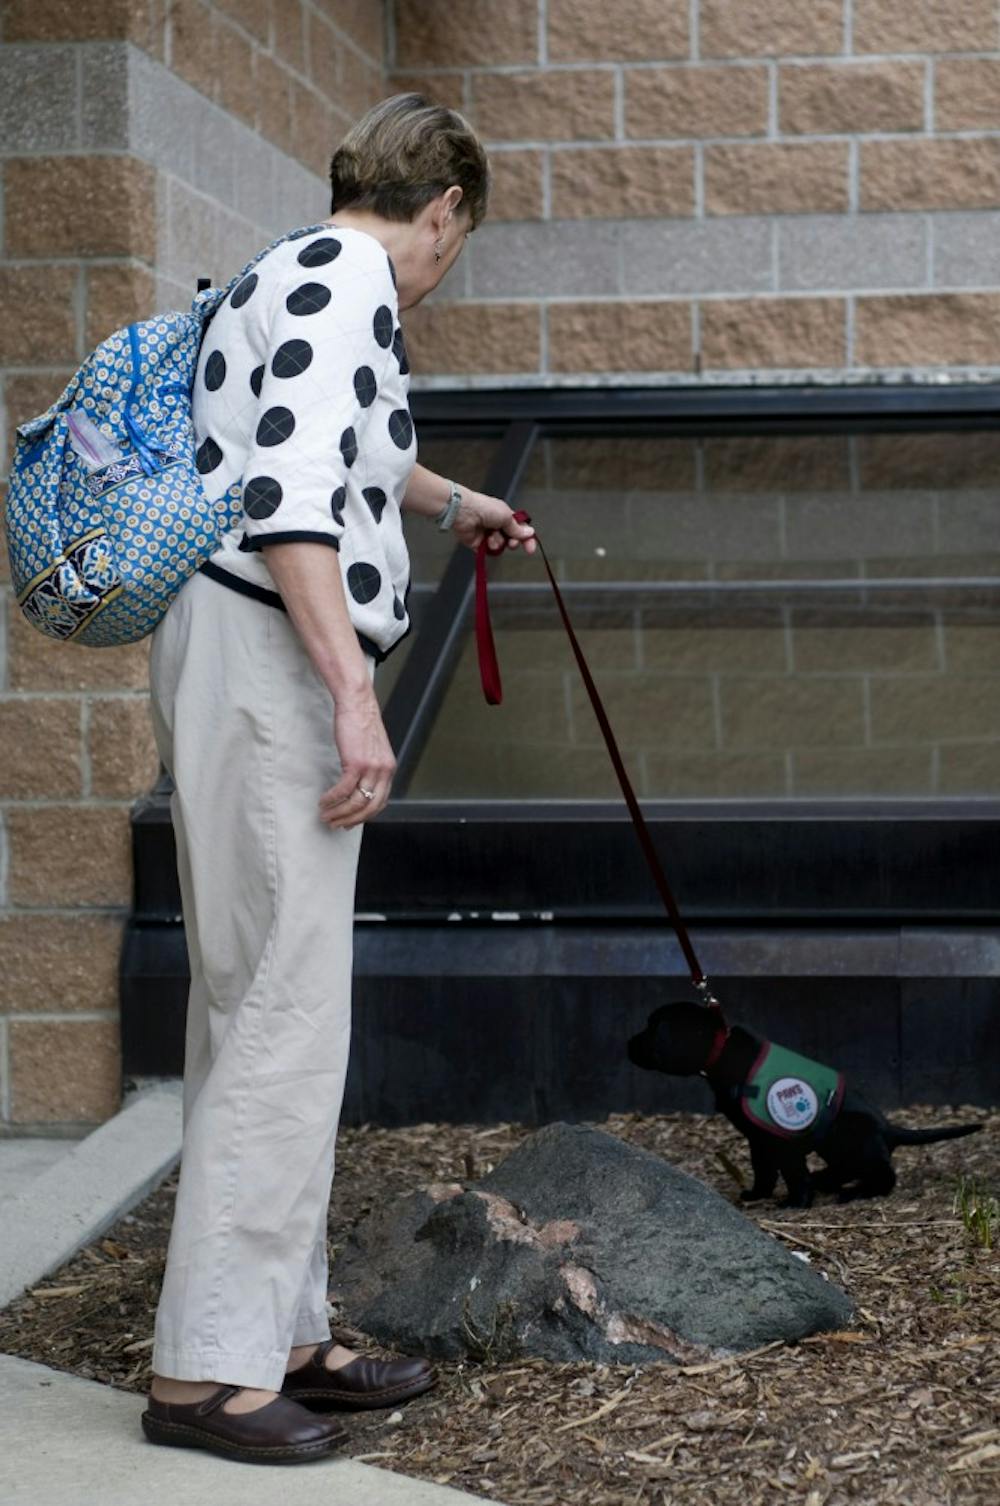 Carol McEllhiney-Luster holds Bess' leash as she goes to the bathroom after service Sunday at University United Method Church, 1120 S. Harrison Road. McEllhiney-Luster said service was longer than usual this Sunday, and because Bess is still so young, she was quick to get her outside afterward. Matt Radick/The State News